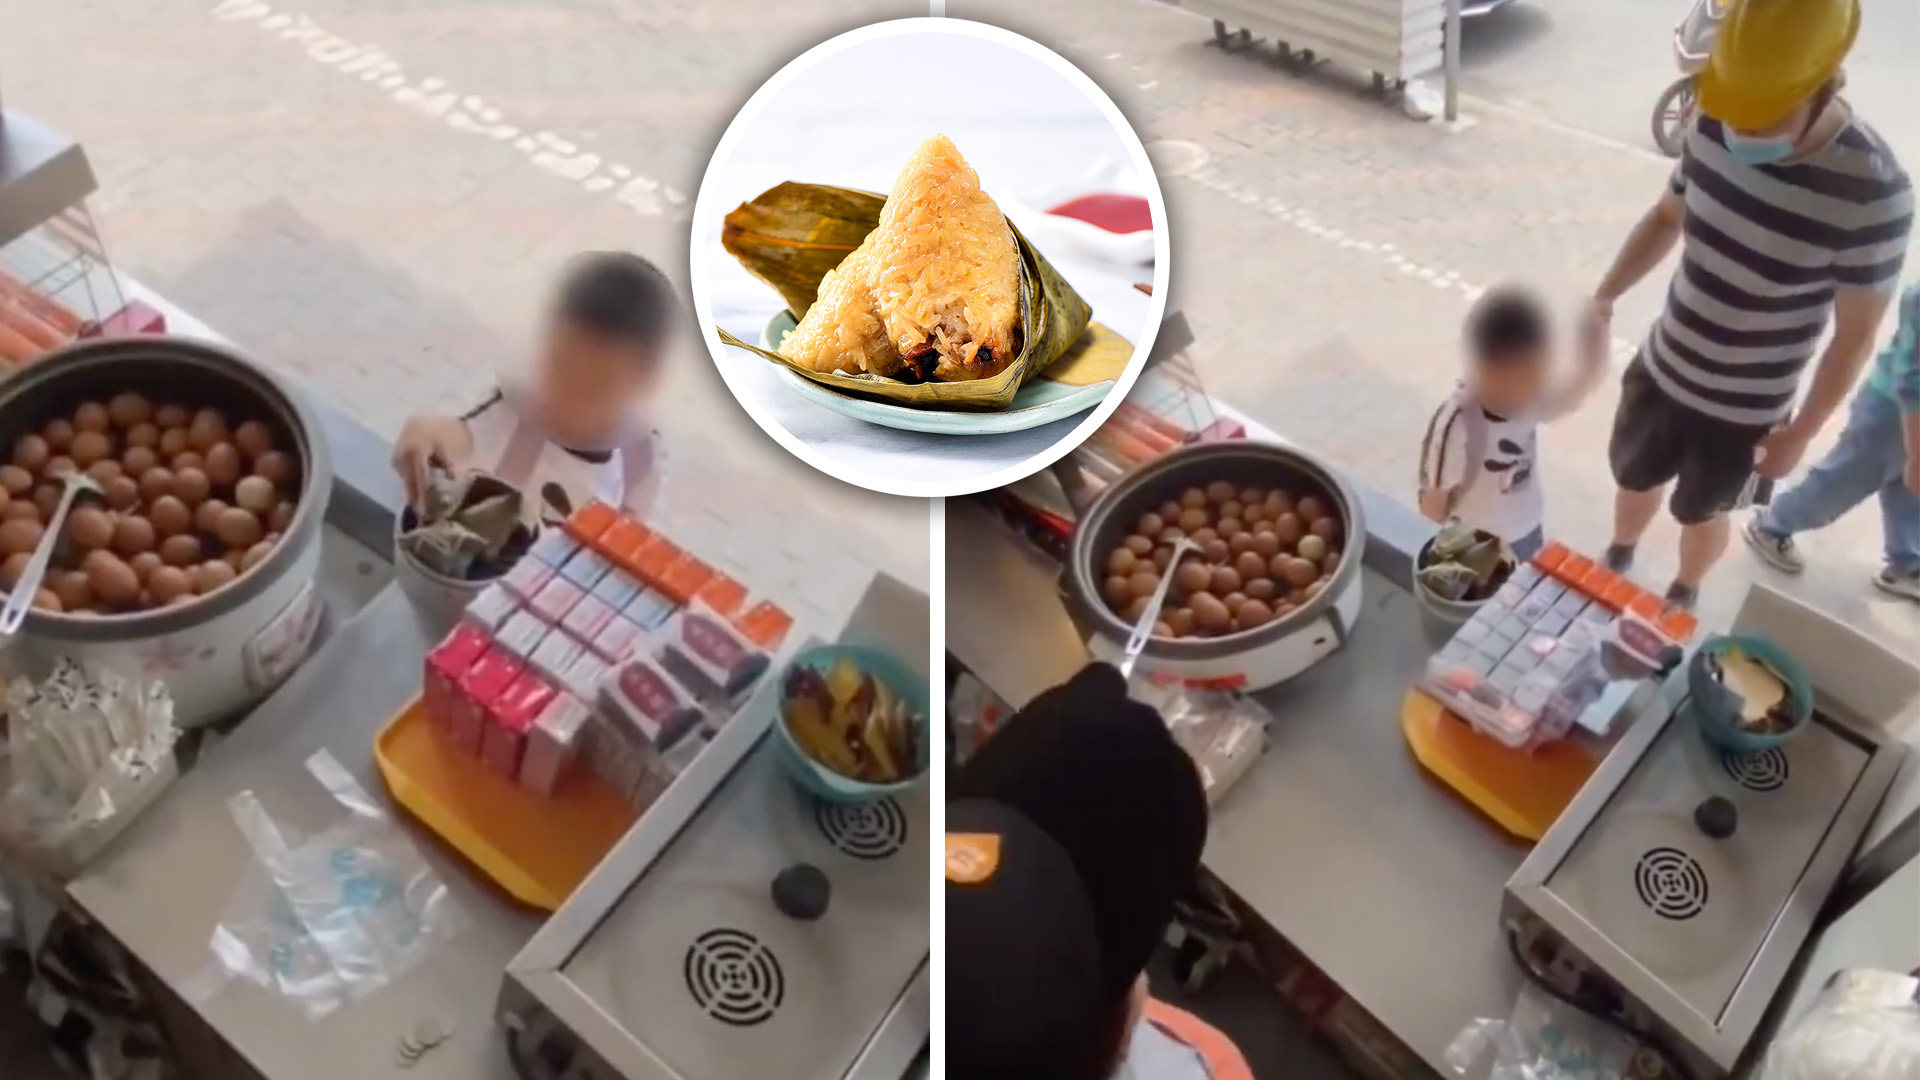 People on mainland social media have showered praise on a father in China who taught his young son a life lesson by making him apologise for stealing a sticky rice dumpling from a shop. Photo: SCMP composite/Weibo/@Xinhua